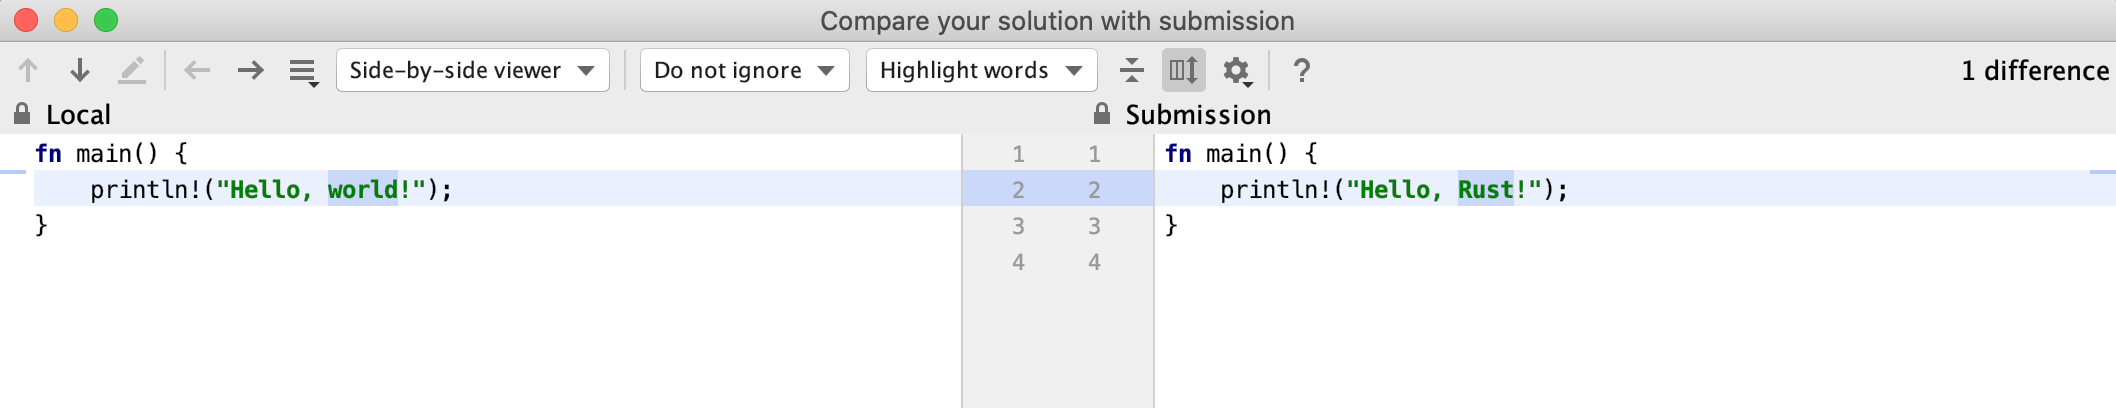 edu submissions diff rust png